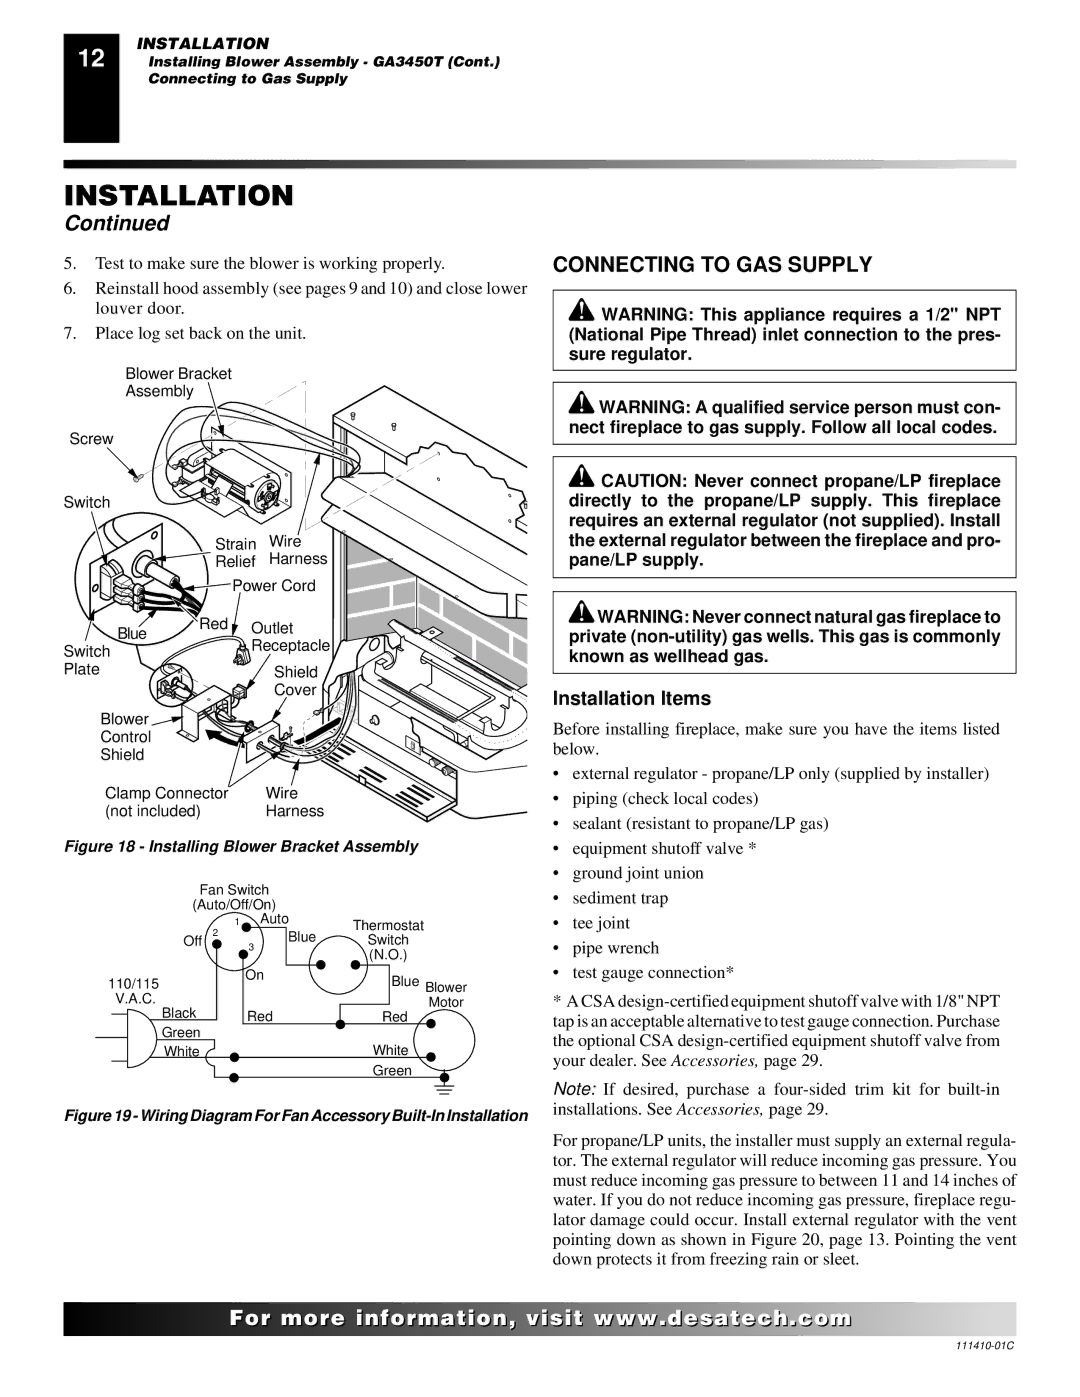 Desa CF26NT installation manual Connecting to GAS Supply, Installation Items 